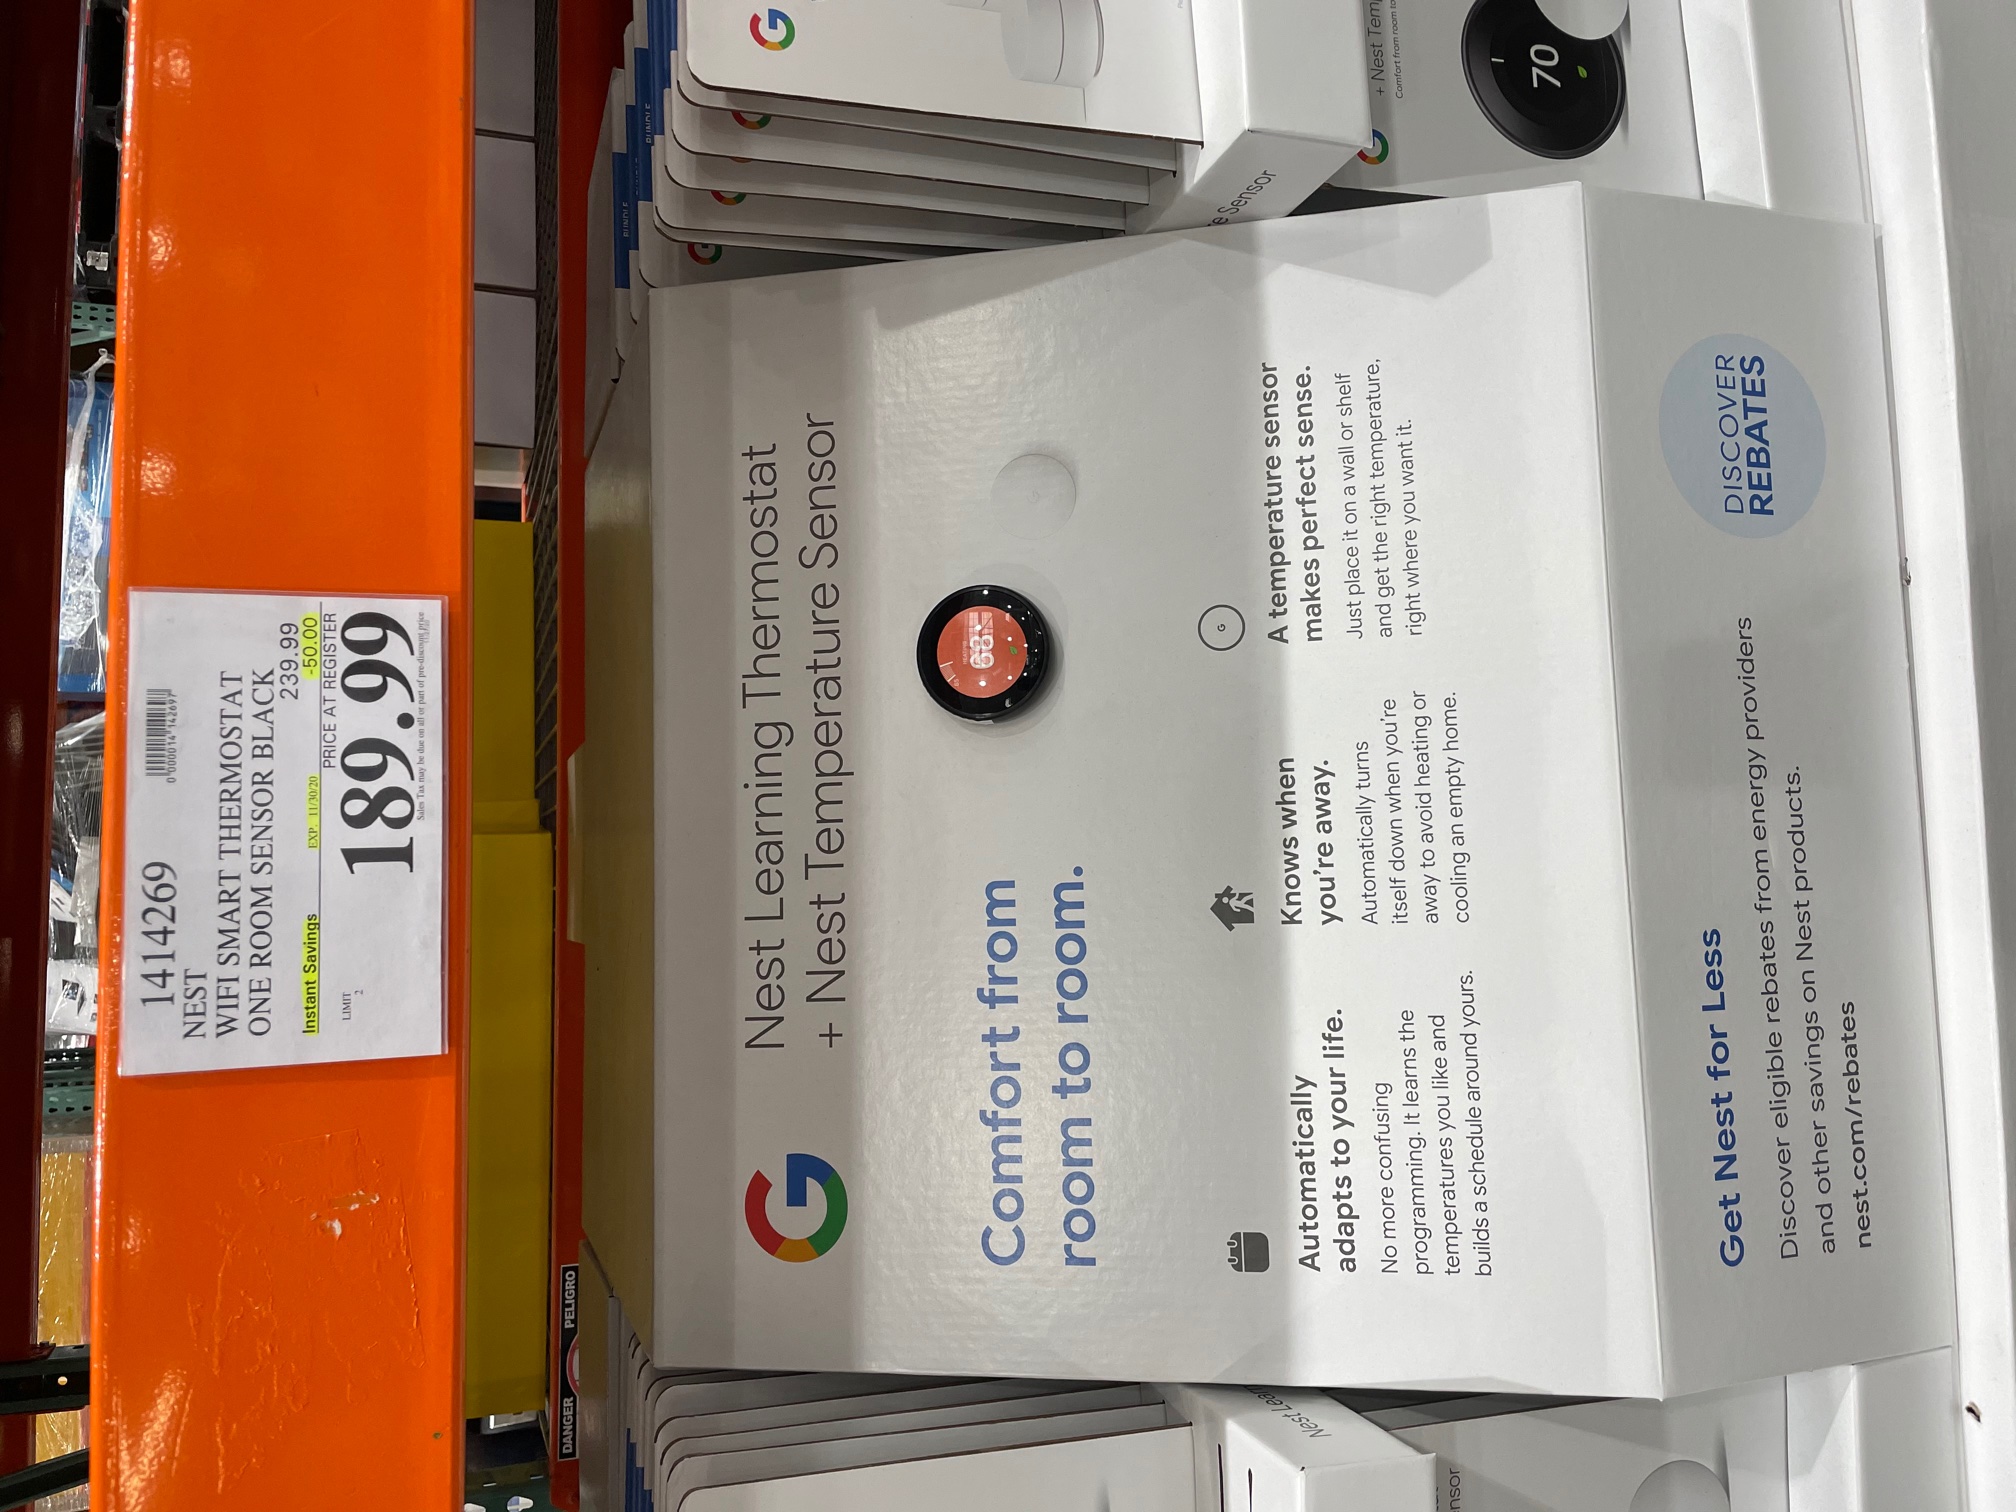 Costco: In-store: Google Nest Learning Thermostat with Nest Temperature Sensor - $189 YMMV $189.99